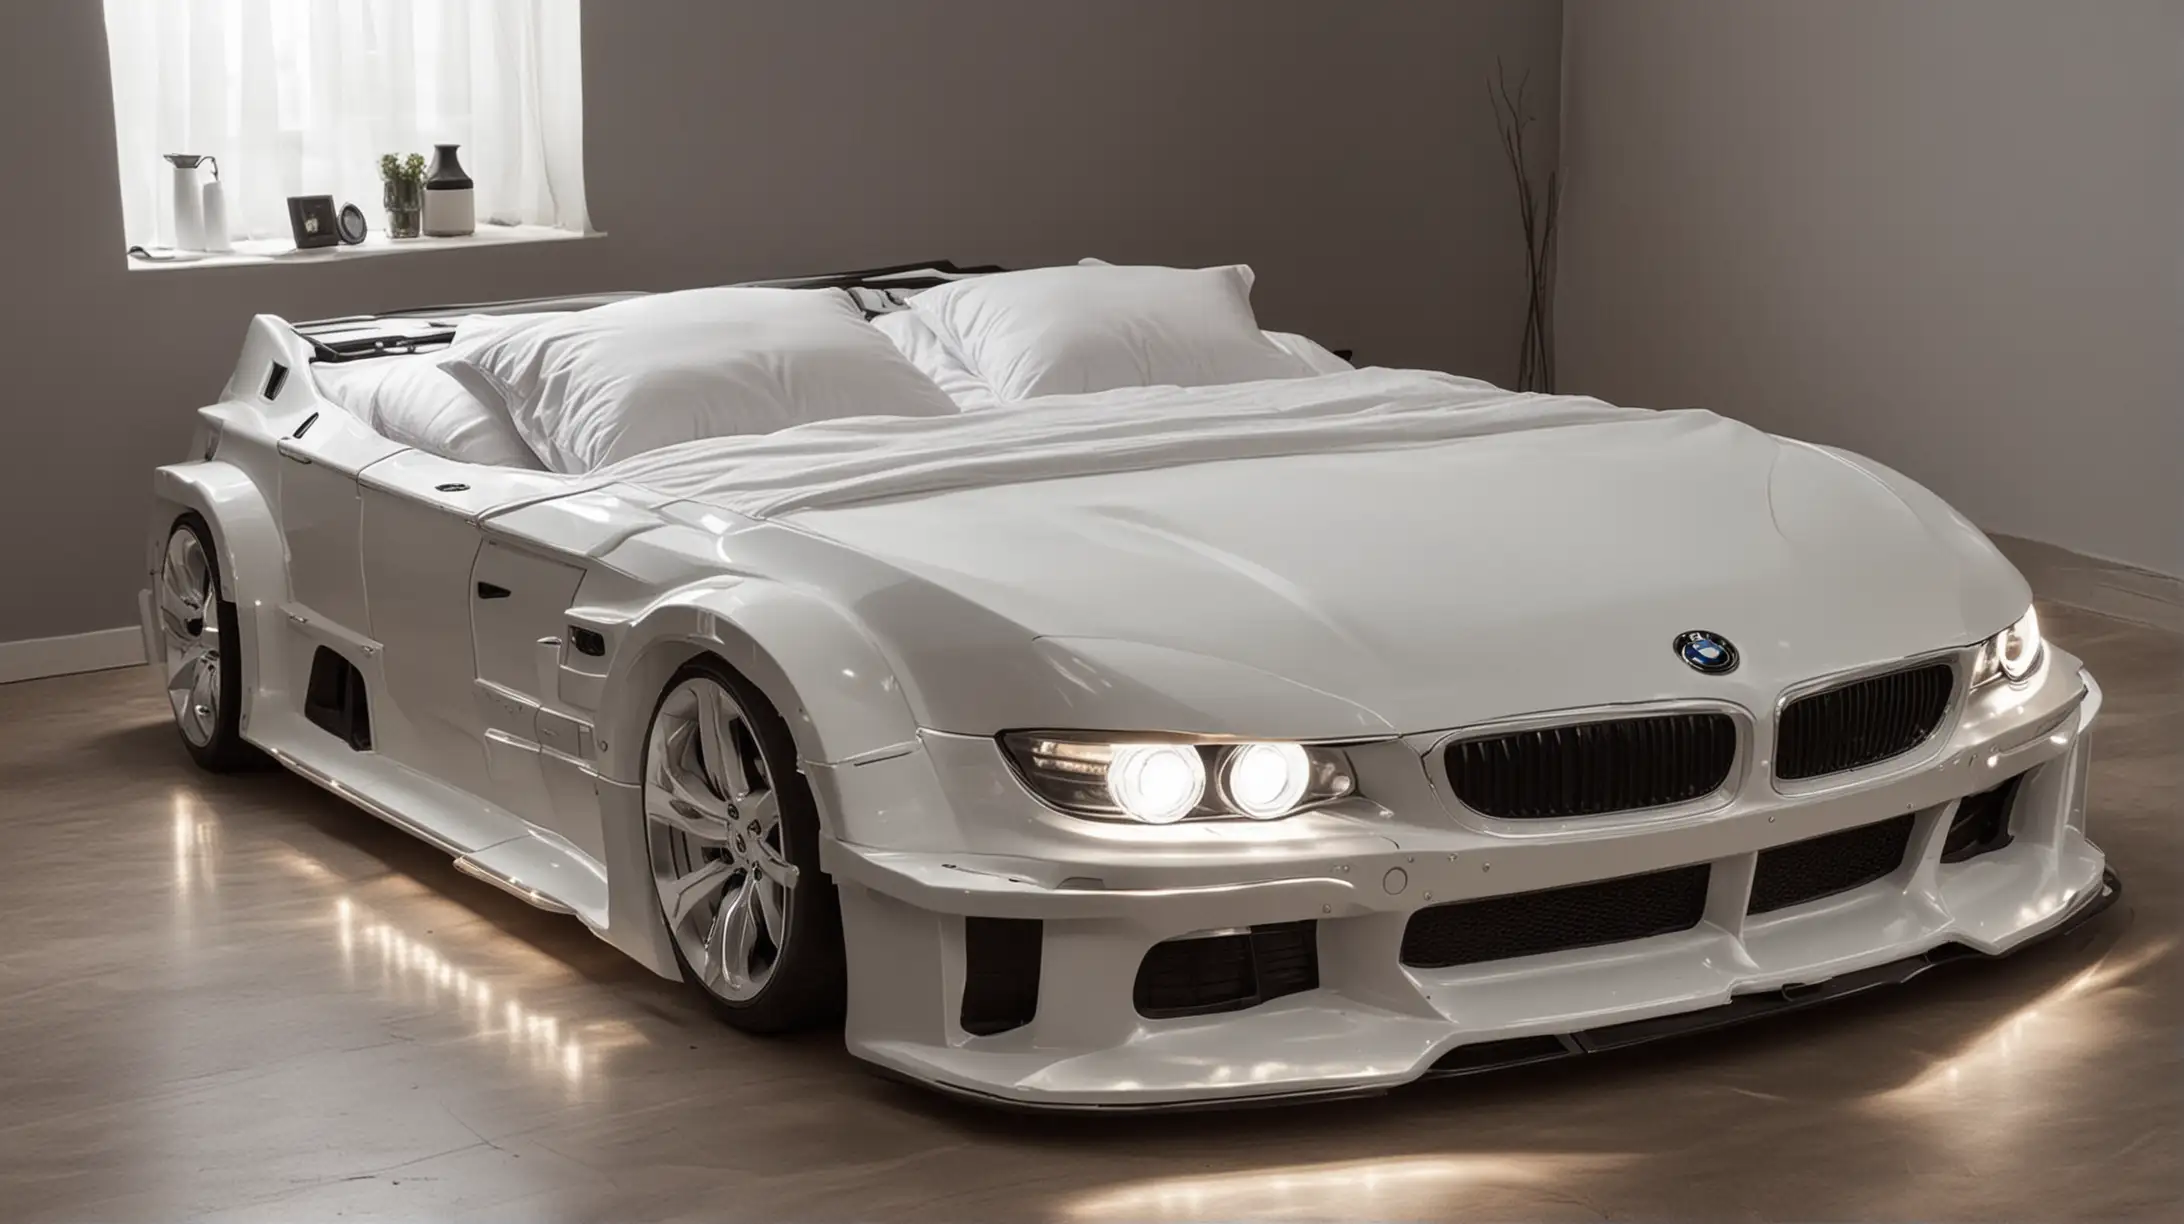 Luxurious BMW Car Double Bed with Illuminated Headlights